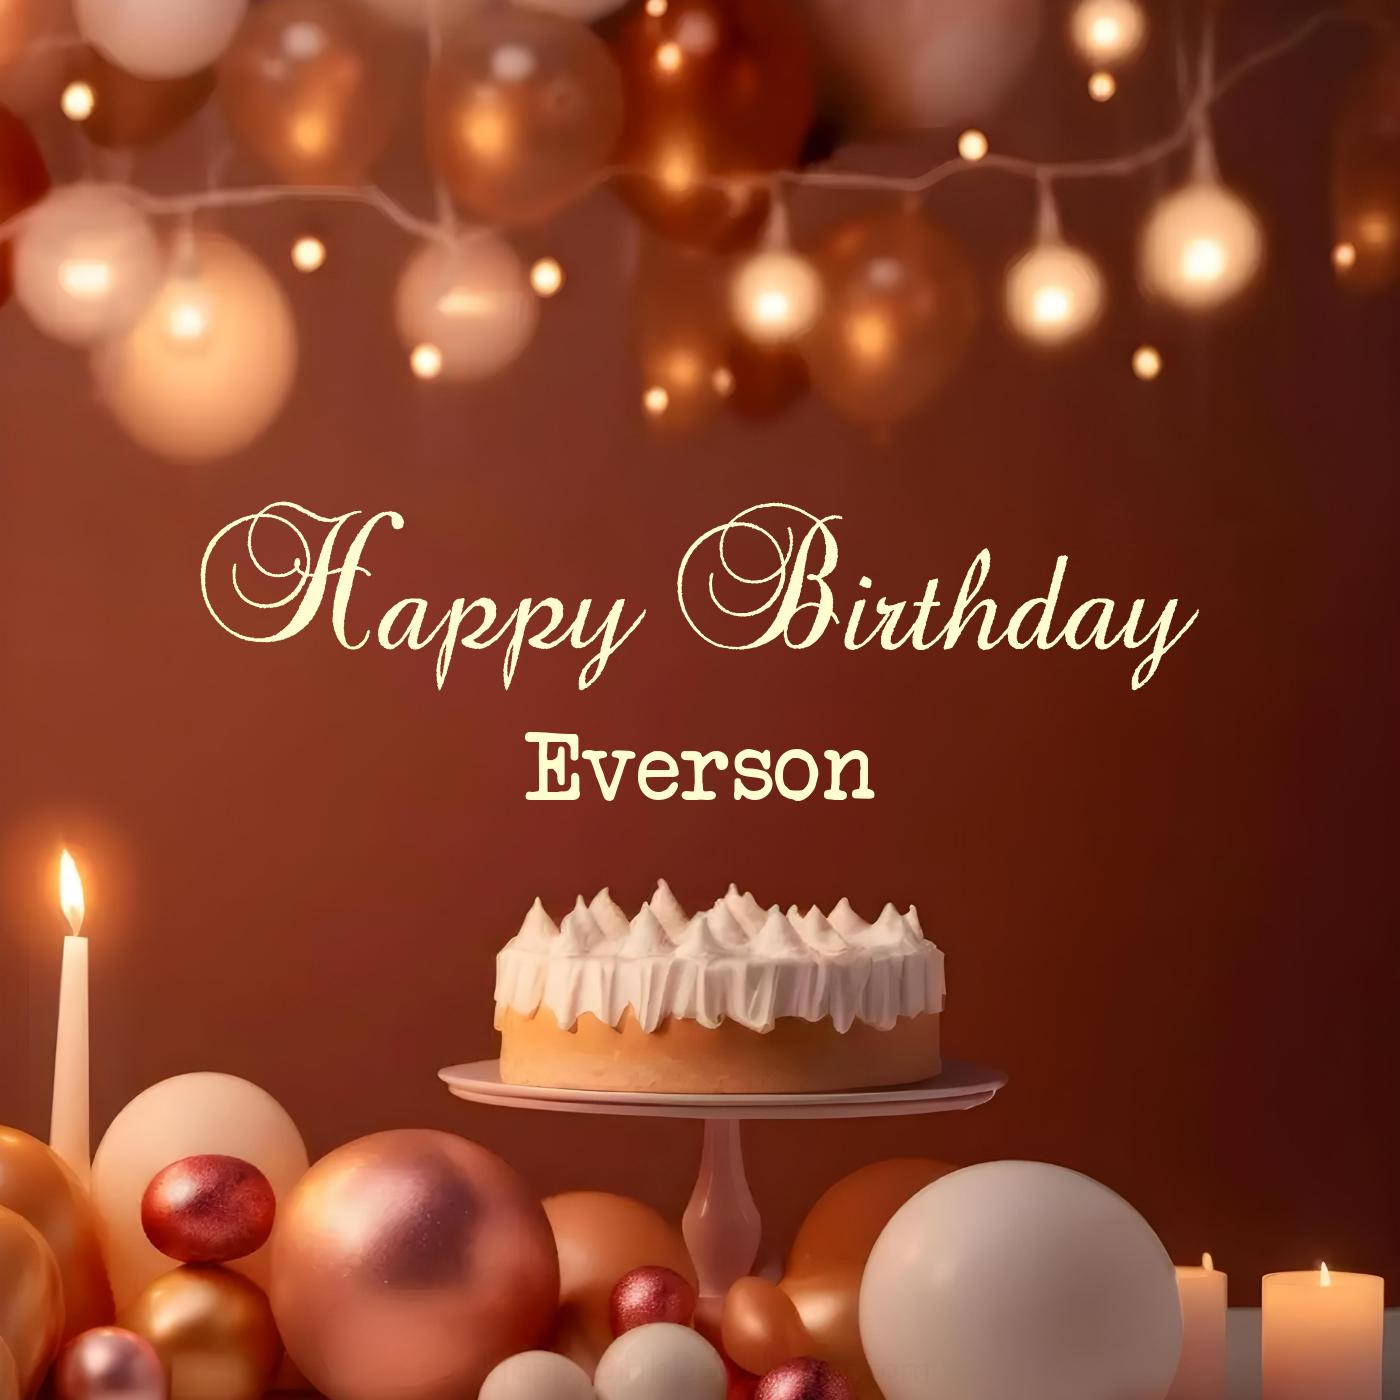 Happy Birthday Everson Cake Candles Card